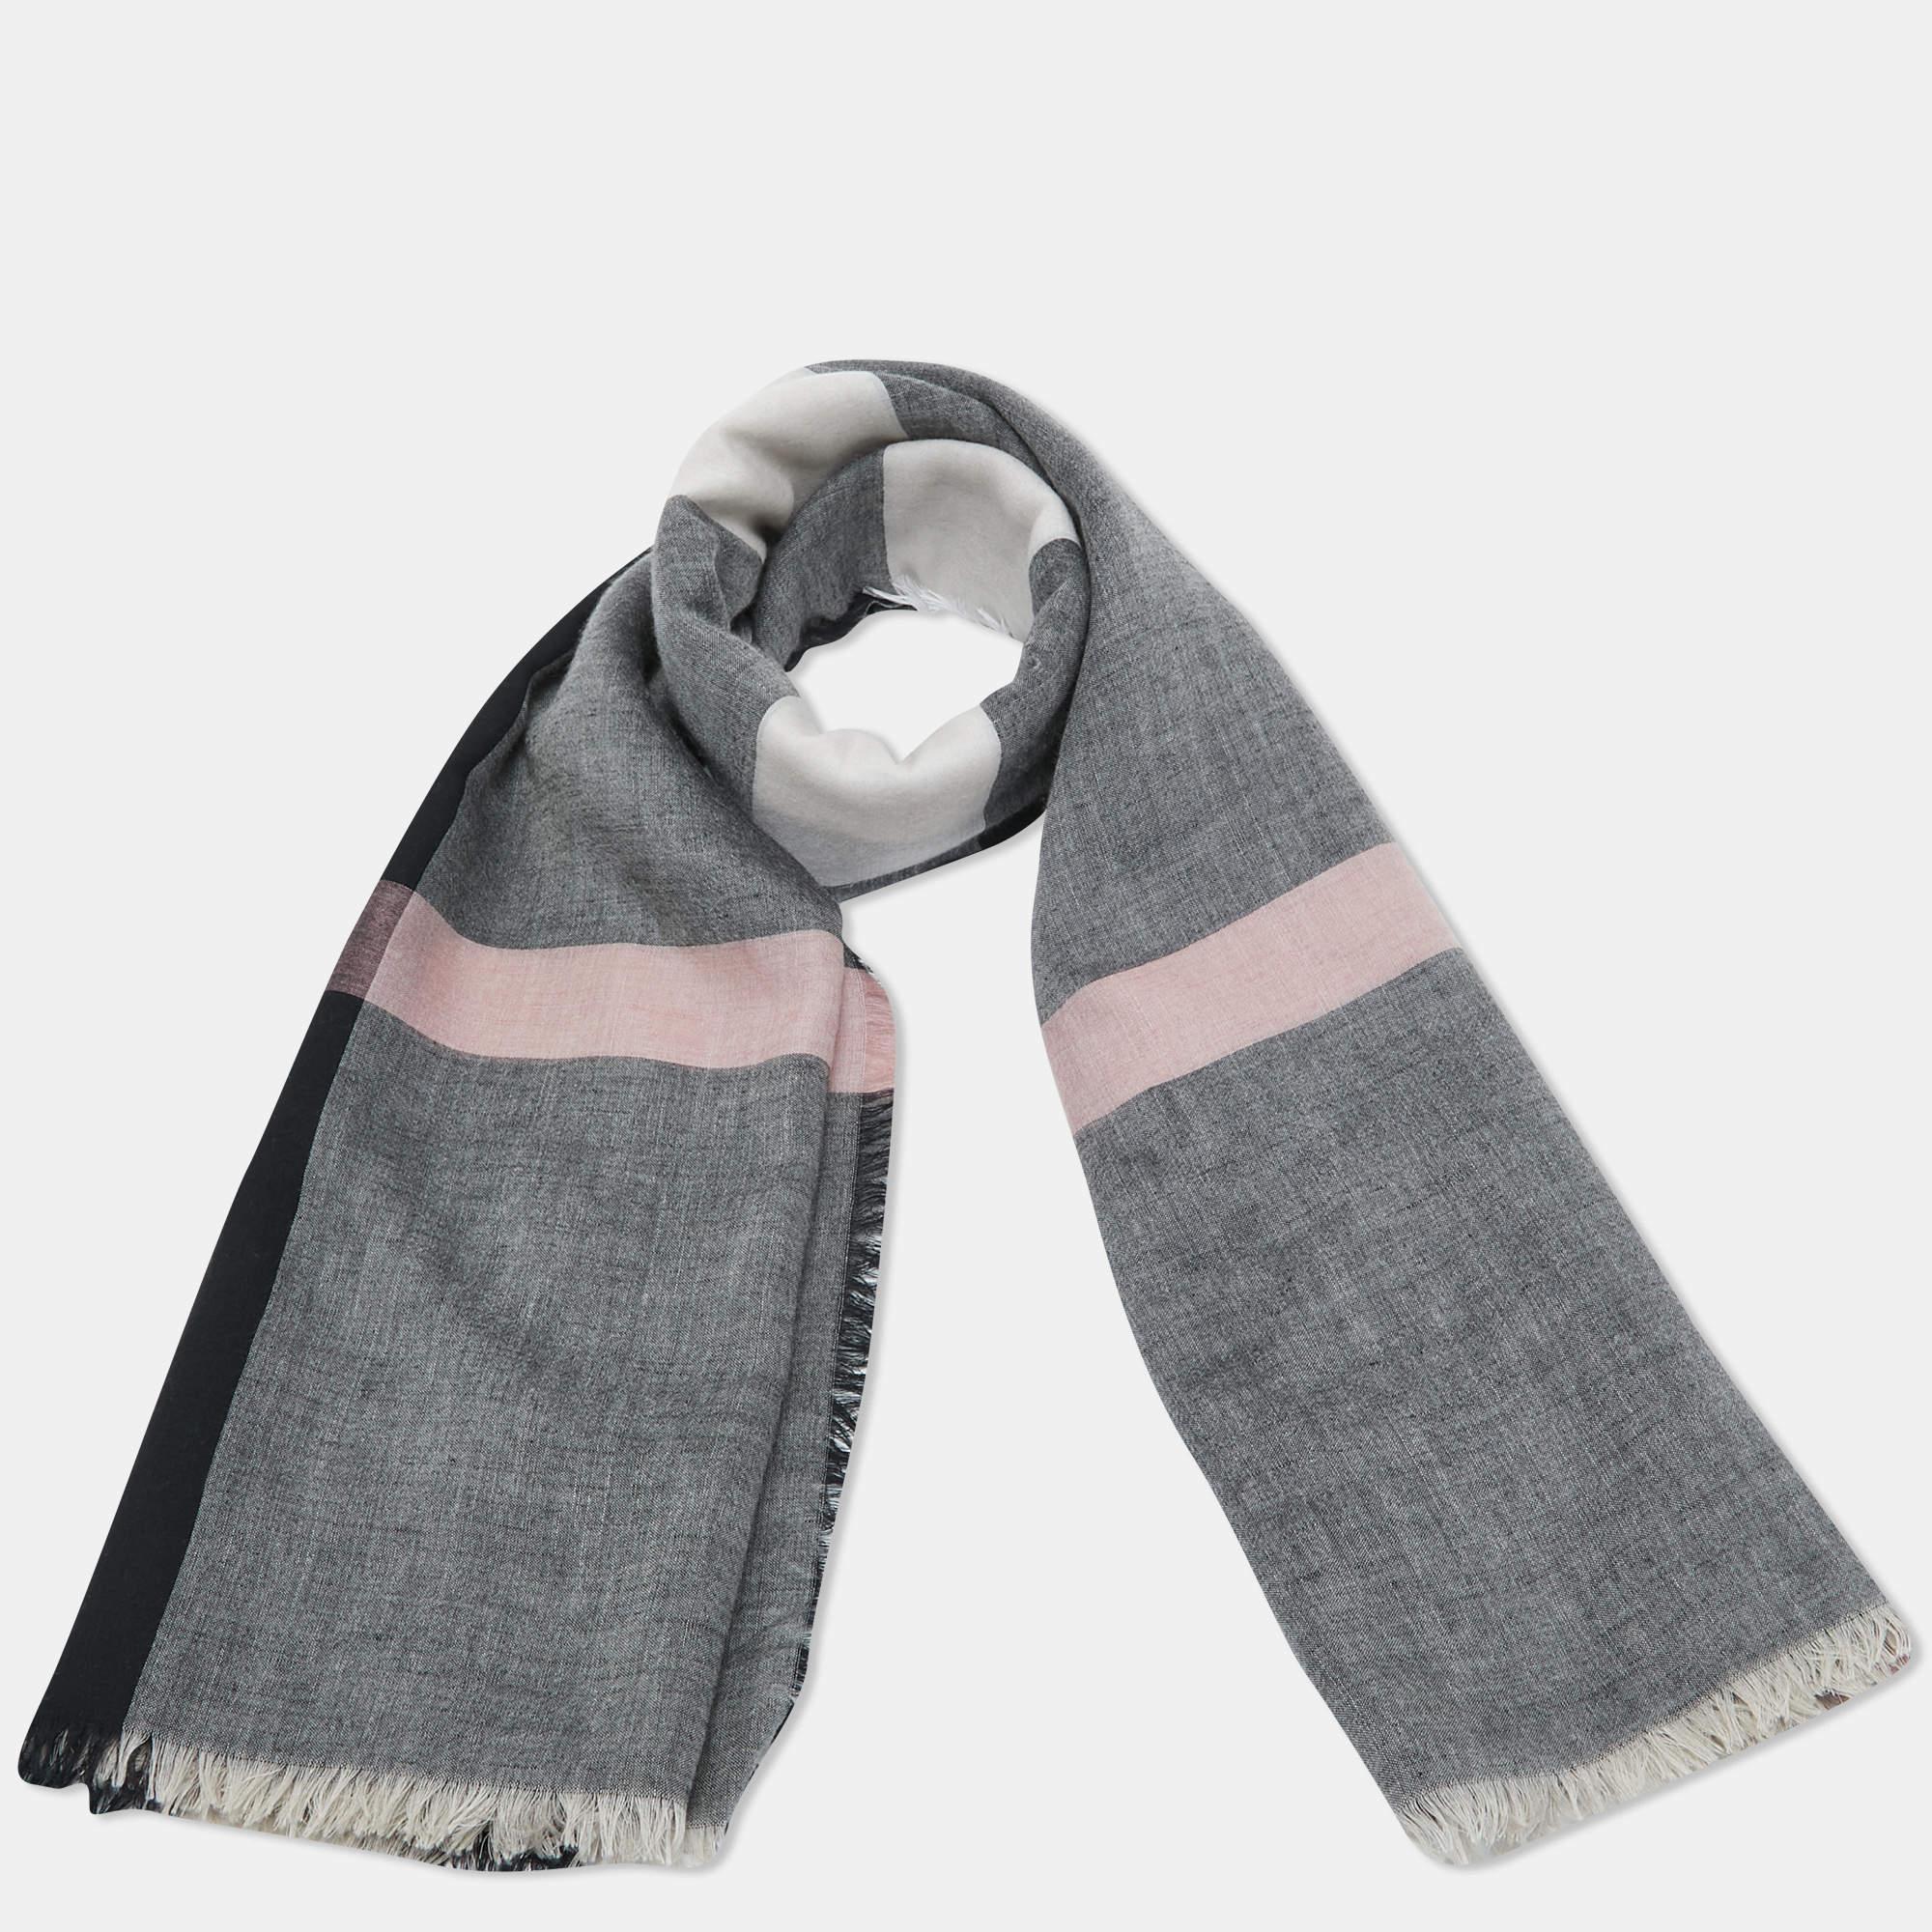 This lovely scarf is a fun way to accessorize your casual outfits and statement totes. This scarf from Burberry features an interesting design. It is cut from smooth fabric and will elevate all your looks.

Includes: Brand Tag